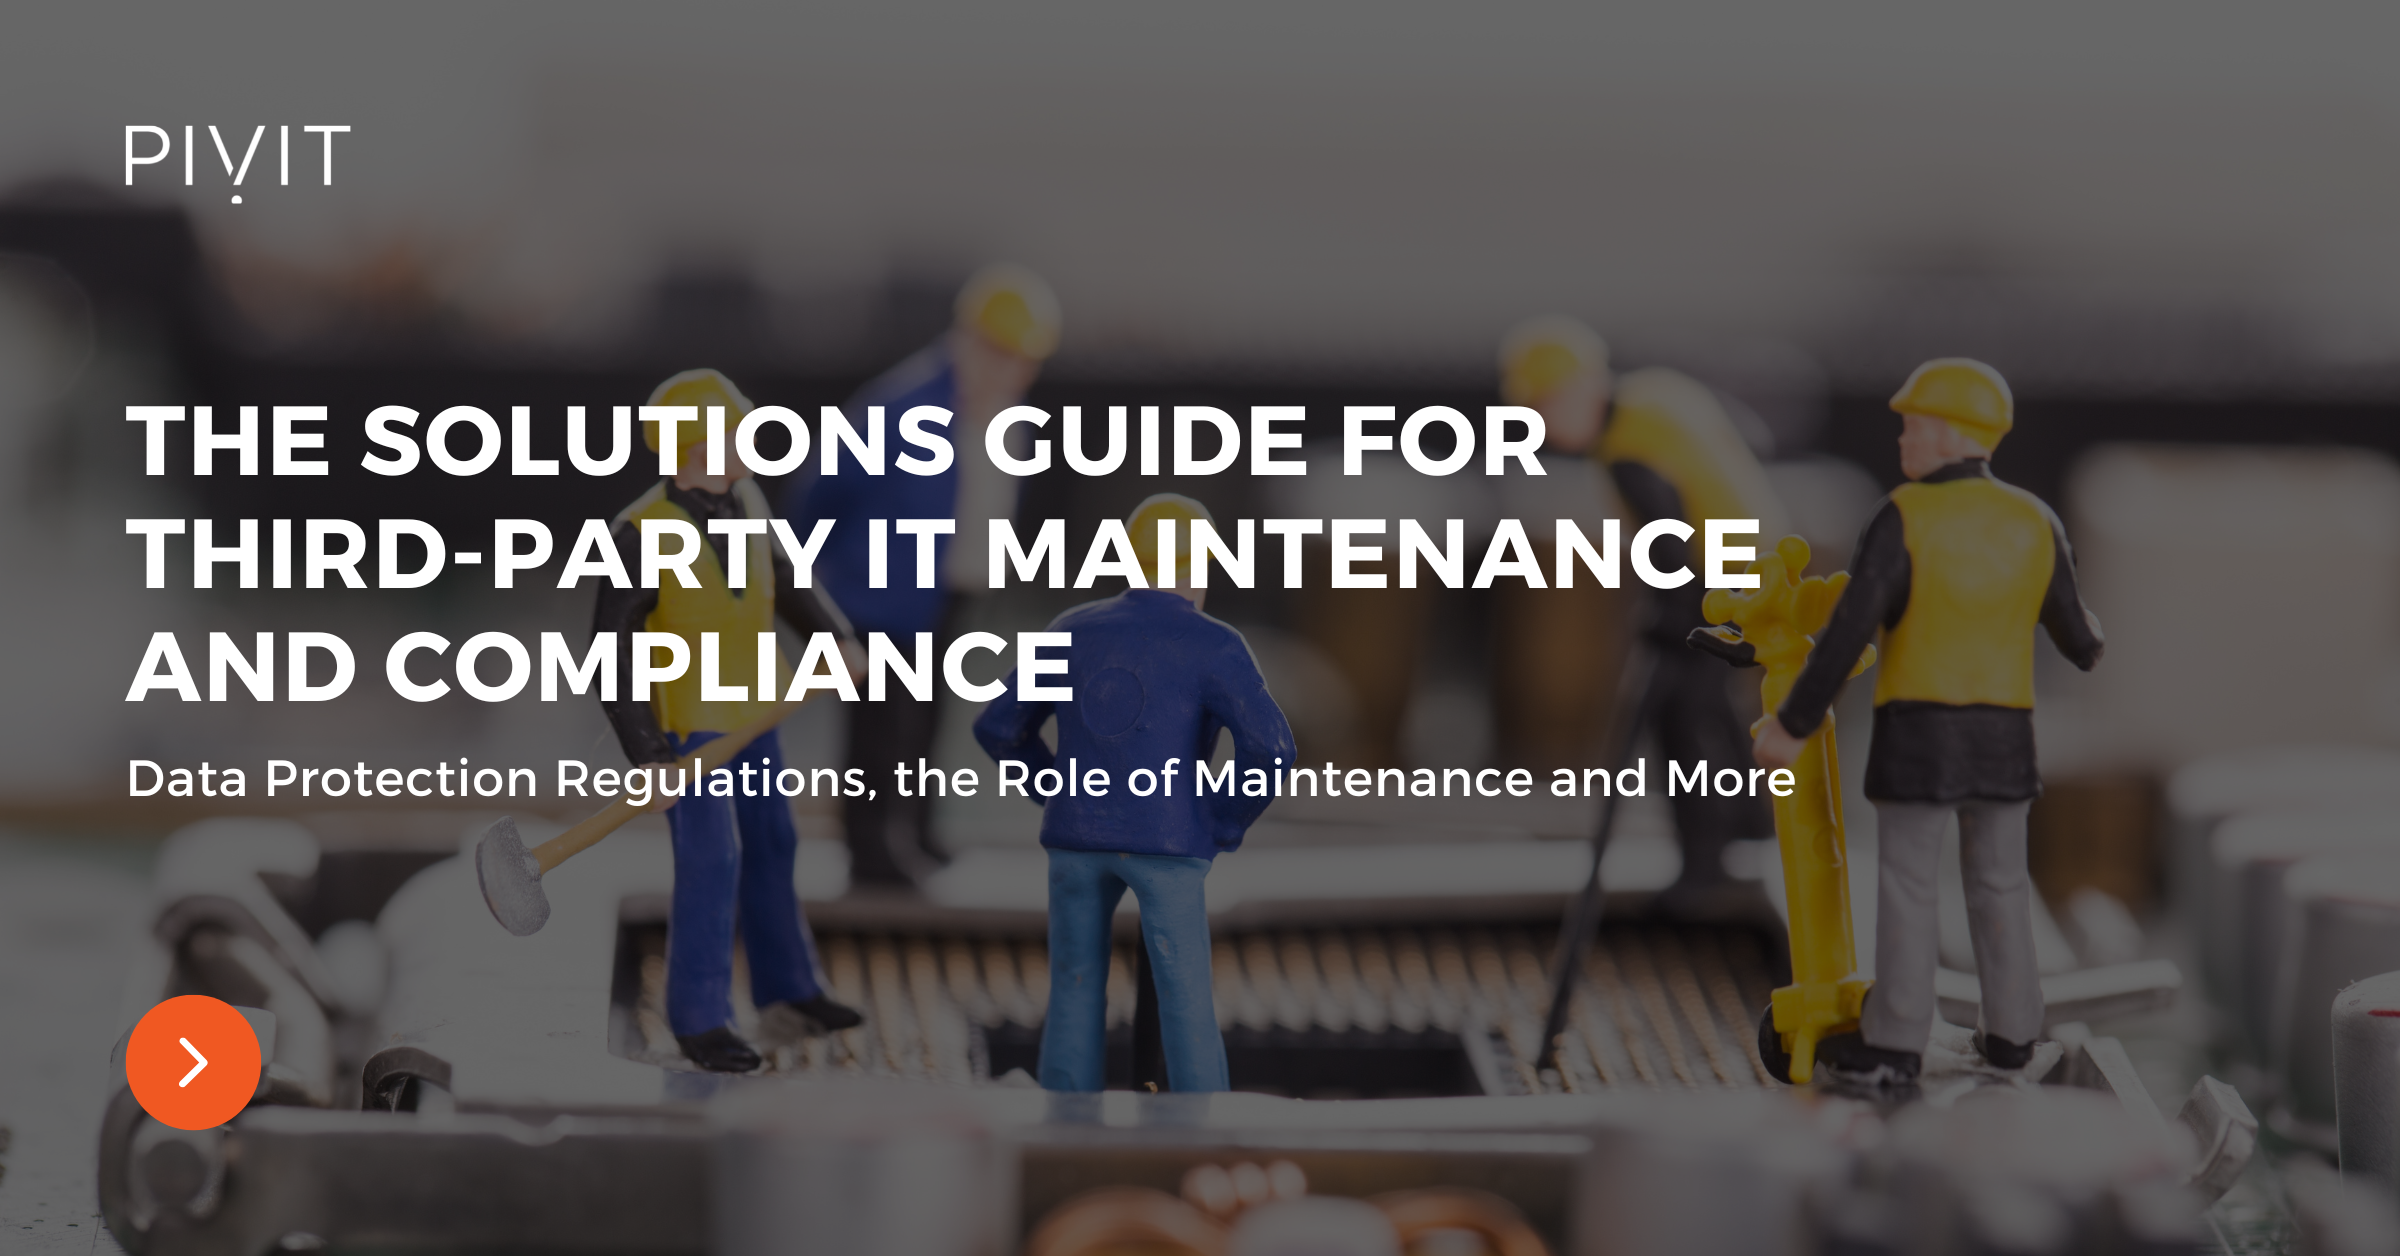 The Solutions Guide for Third-Party IT Maintenance and Compliance